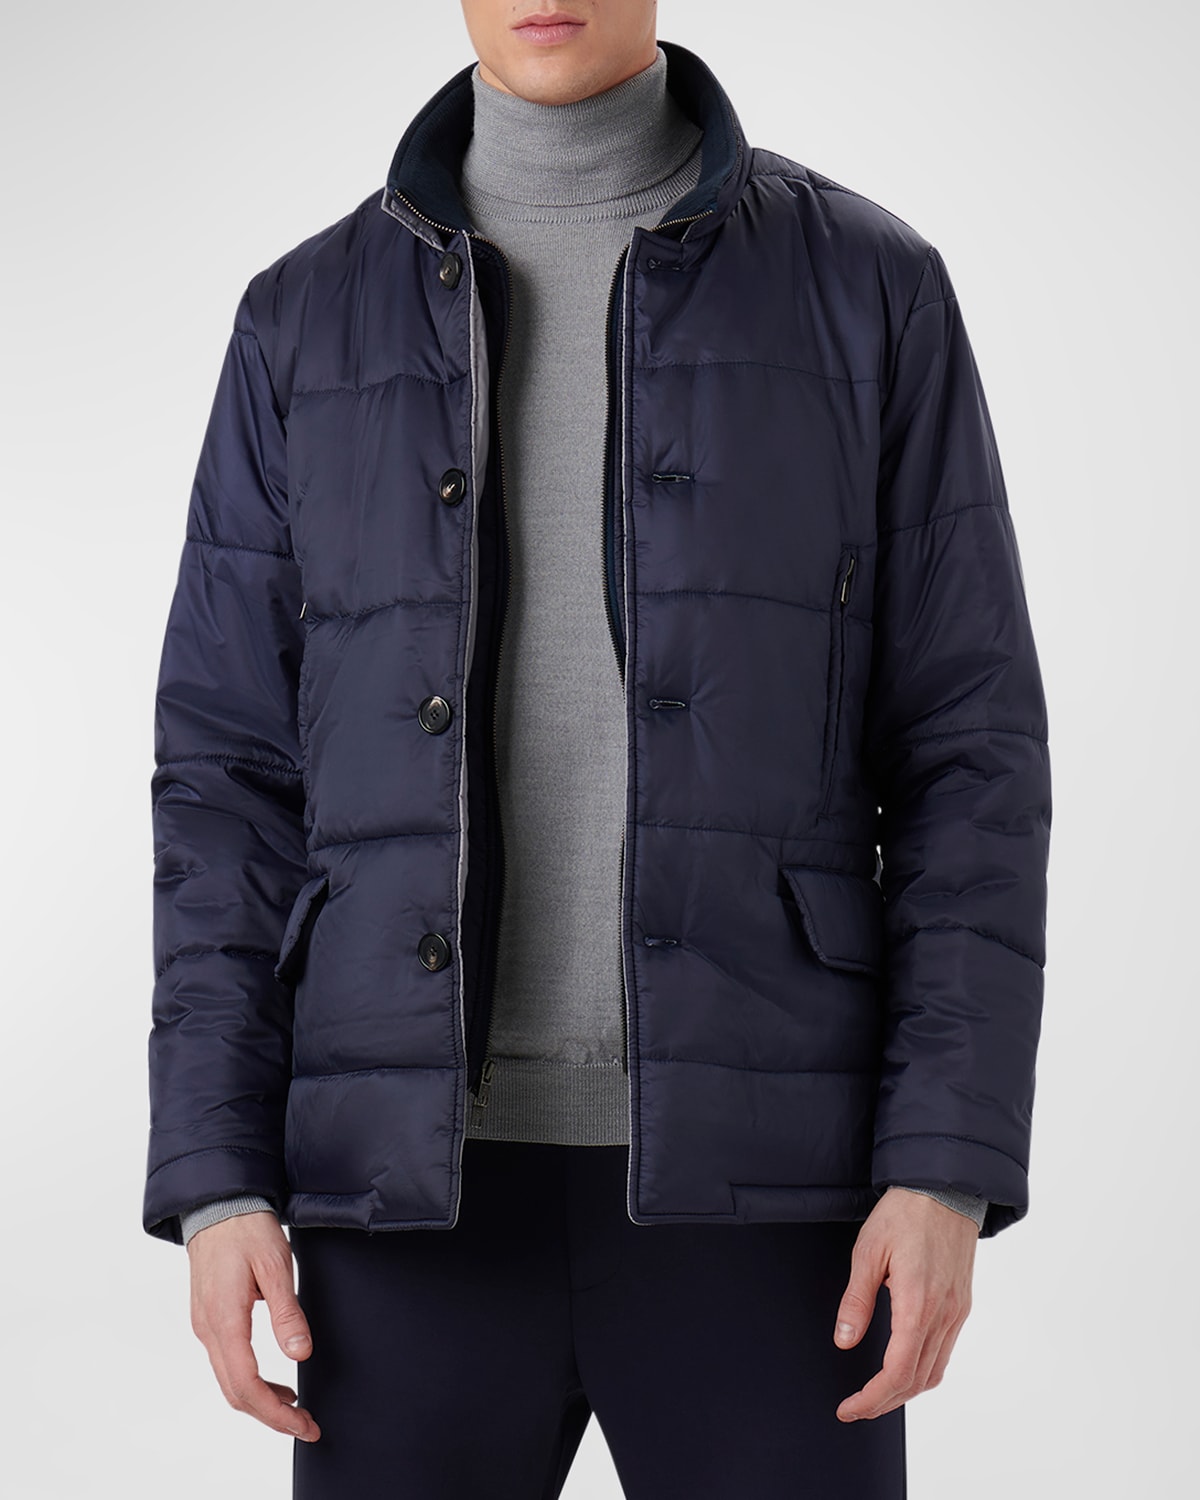 Men's Quilted Jacket with Inner Bib